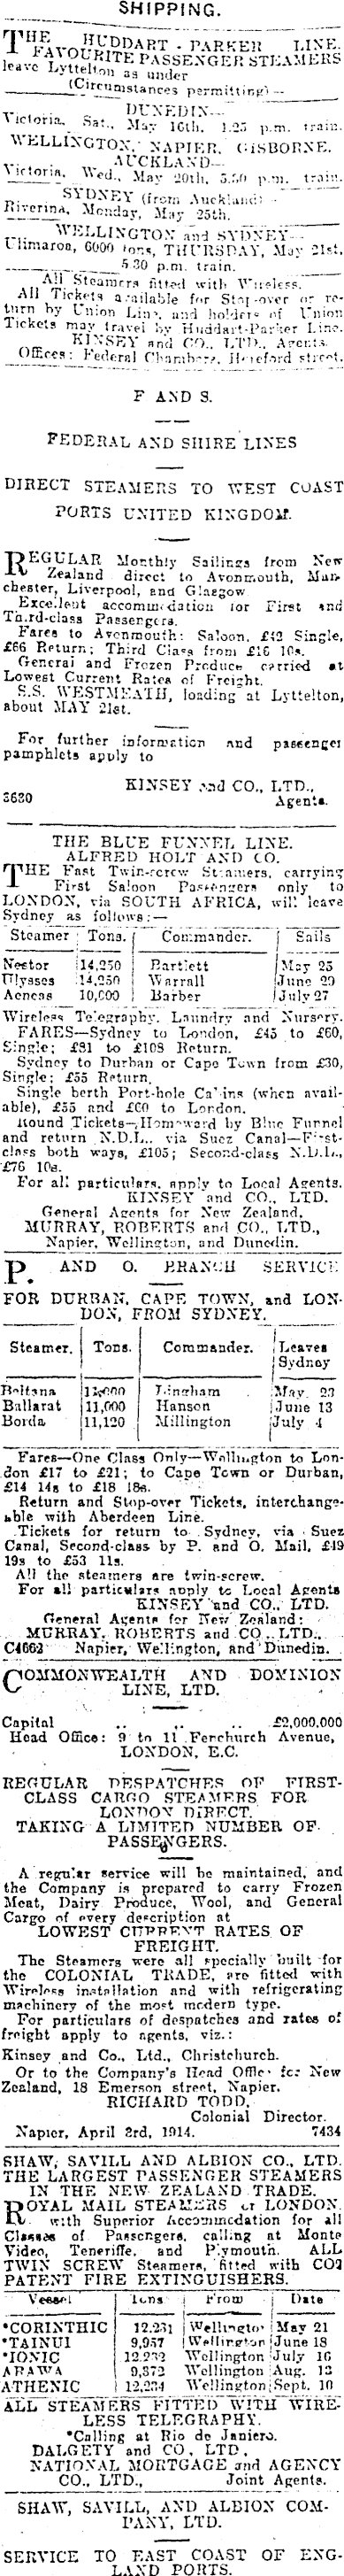 Papers Past Newspapers Press 9 May 1914 Page 1 Advertisements Column 3